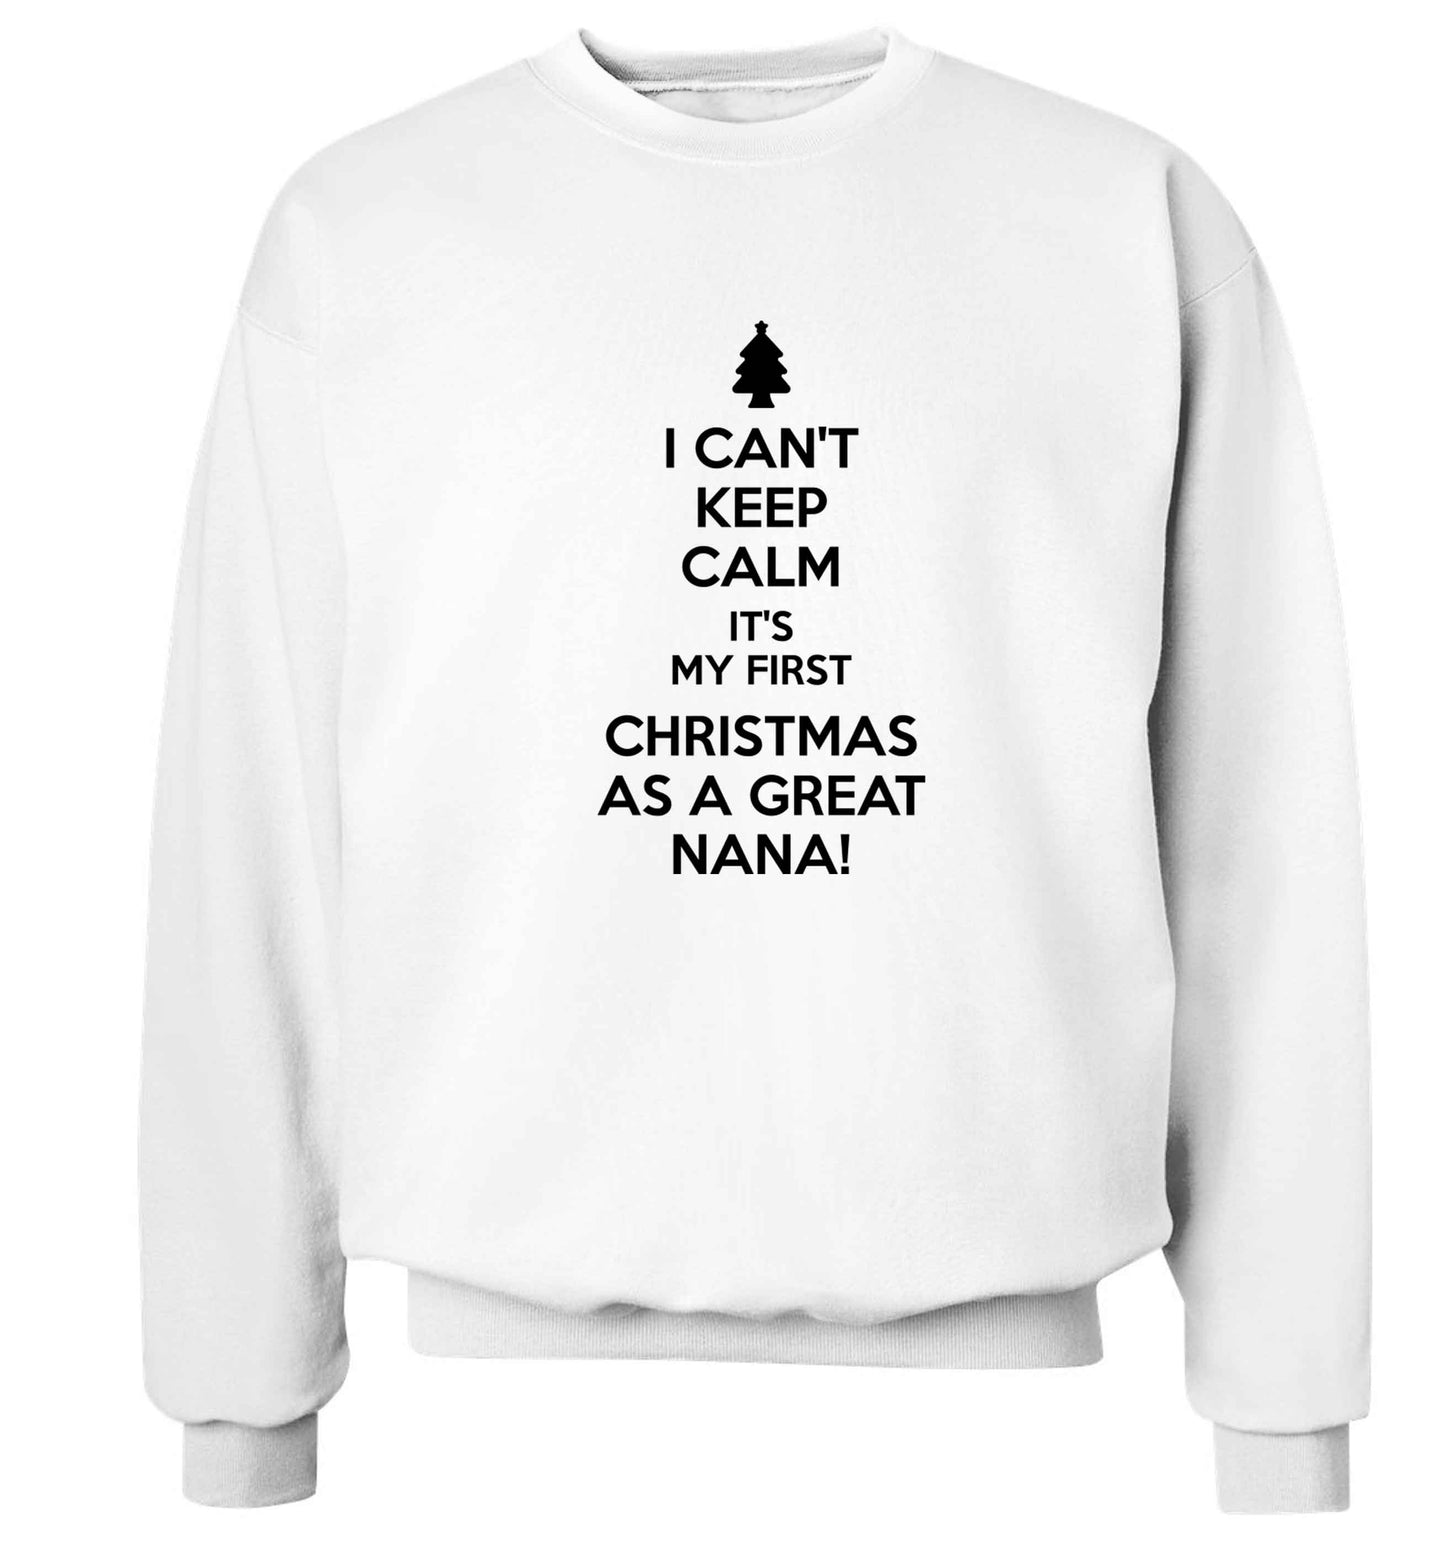 I can't keep calm it's my first Christmas as a great nana! Adult's unisex white Sweater 2XL